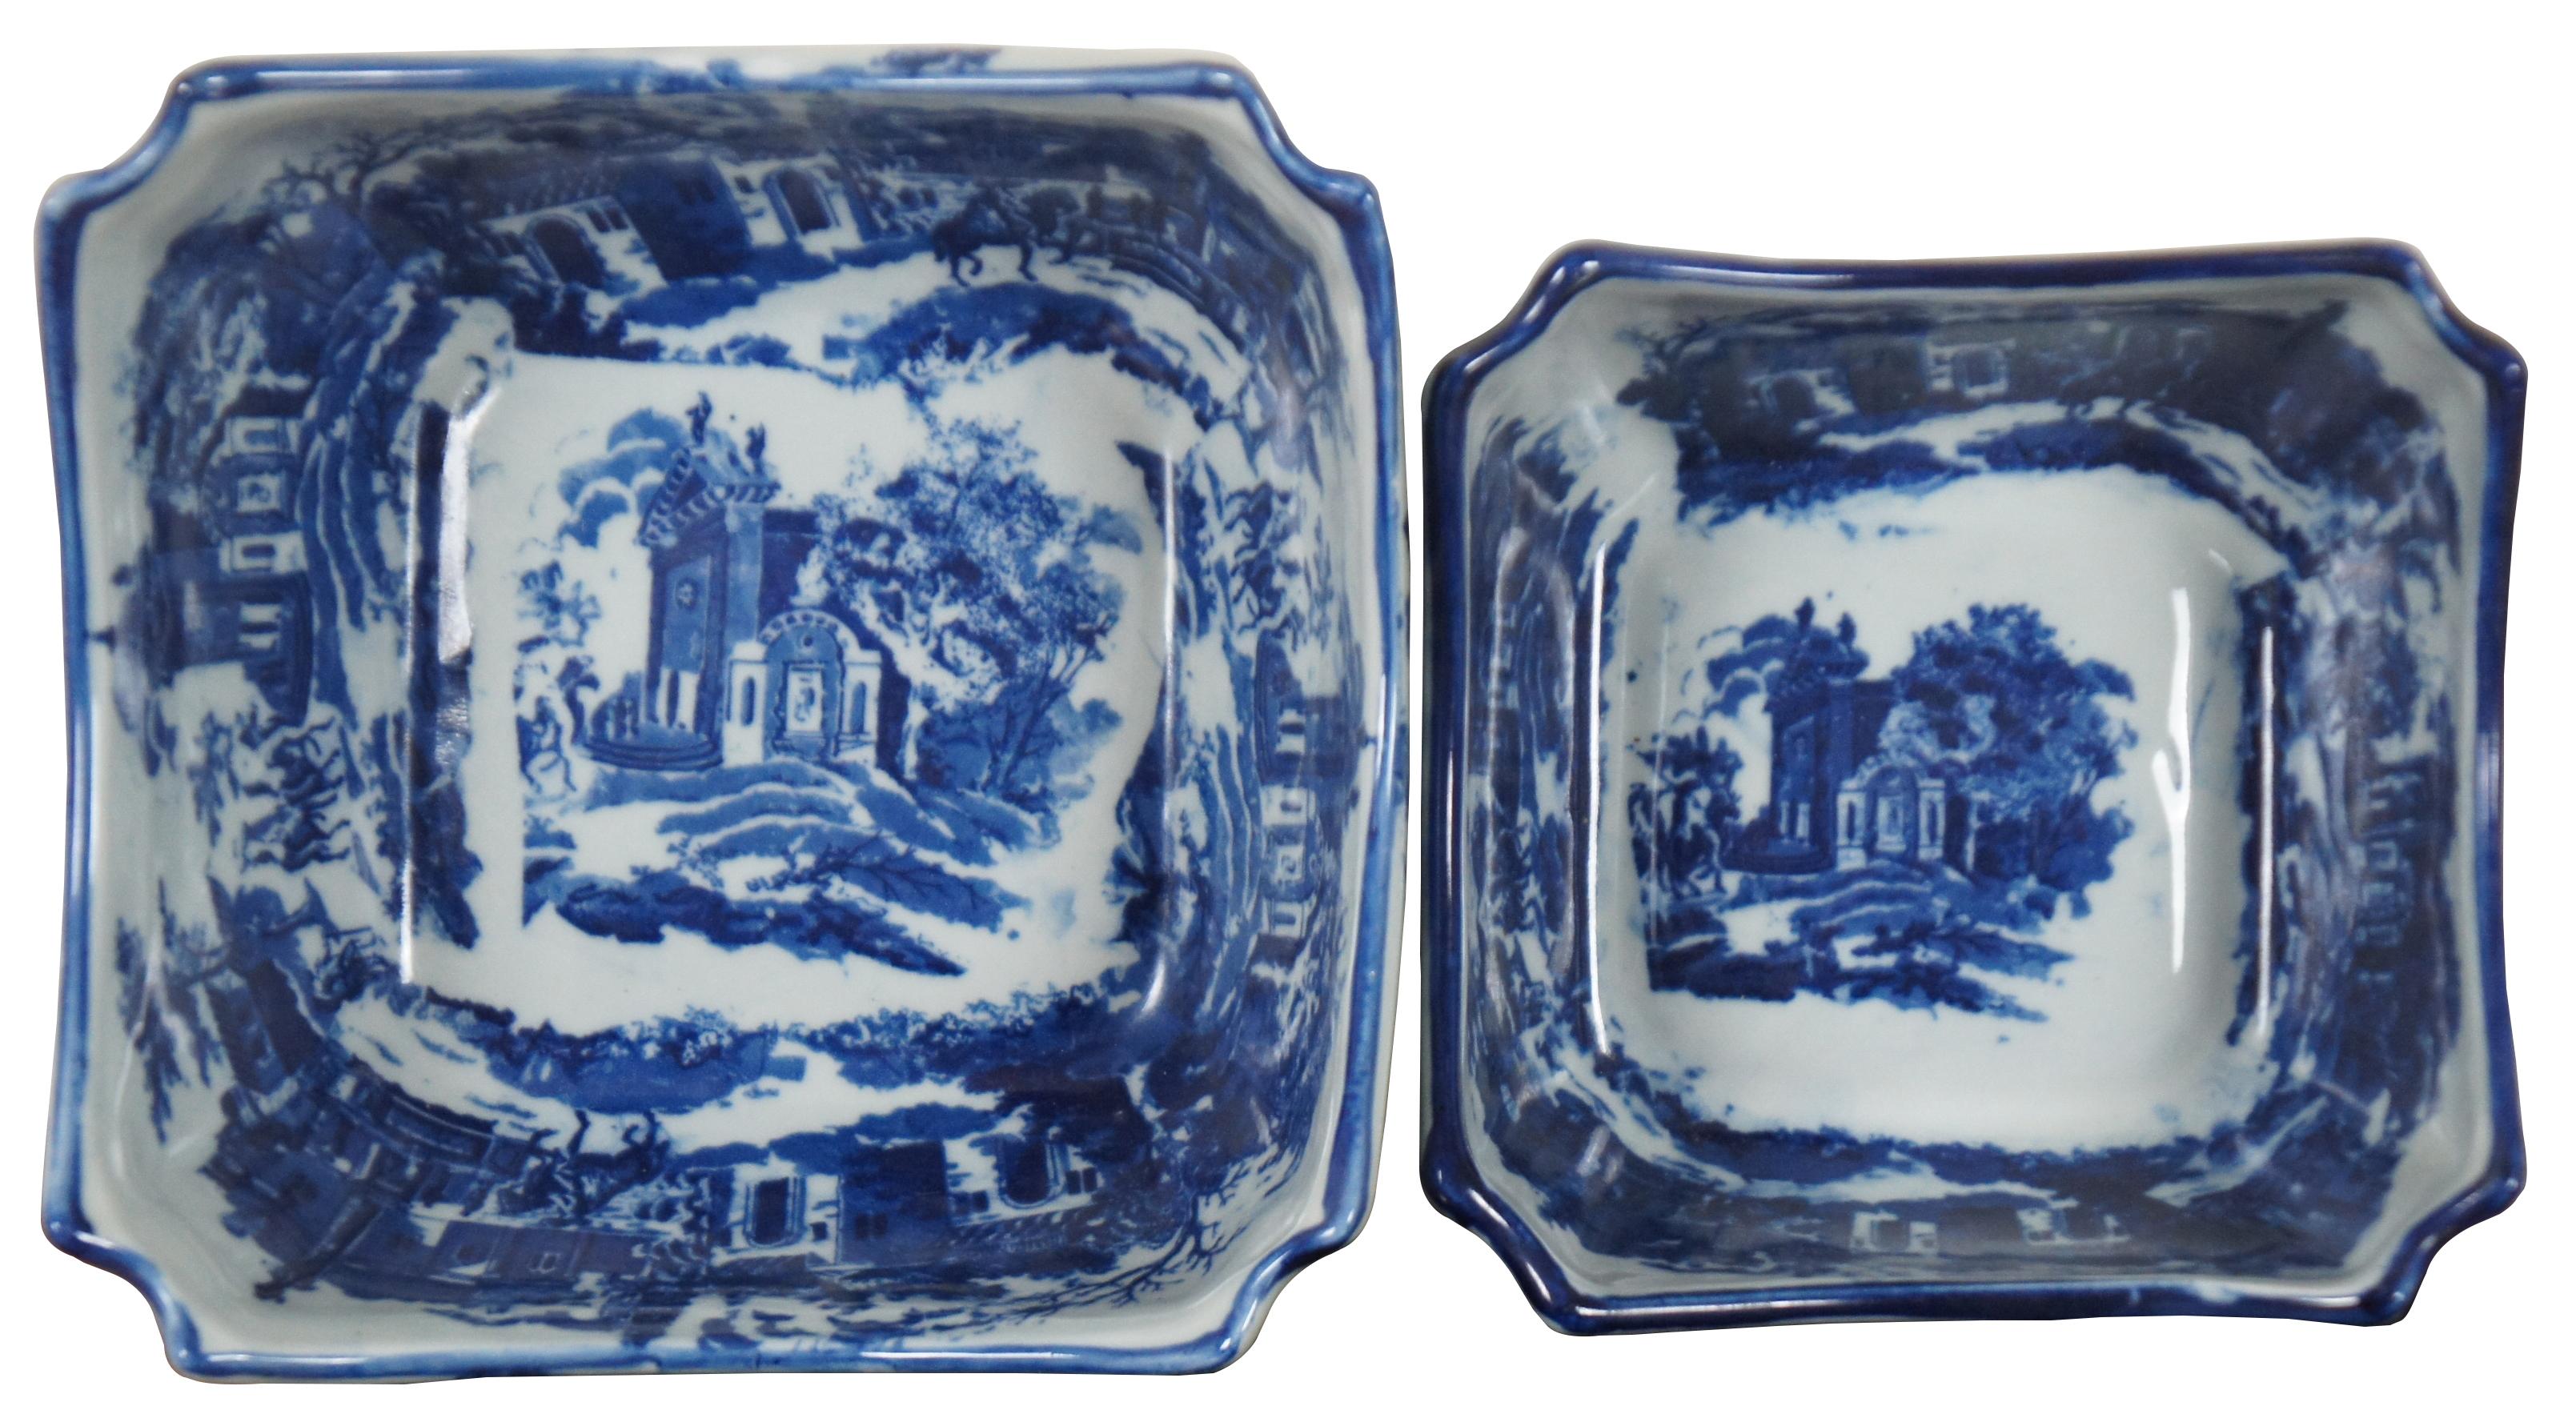 Pair of vintage England Victoria Ware porcelain / ironstone blue and white transferware serving bowls, square with cut corners, featuring a Canton or Chinese export style pattern showing a English / European town scene with figures on